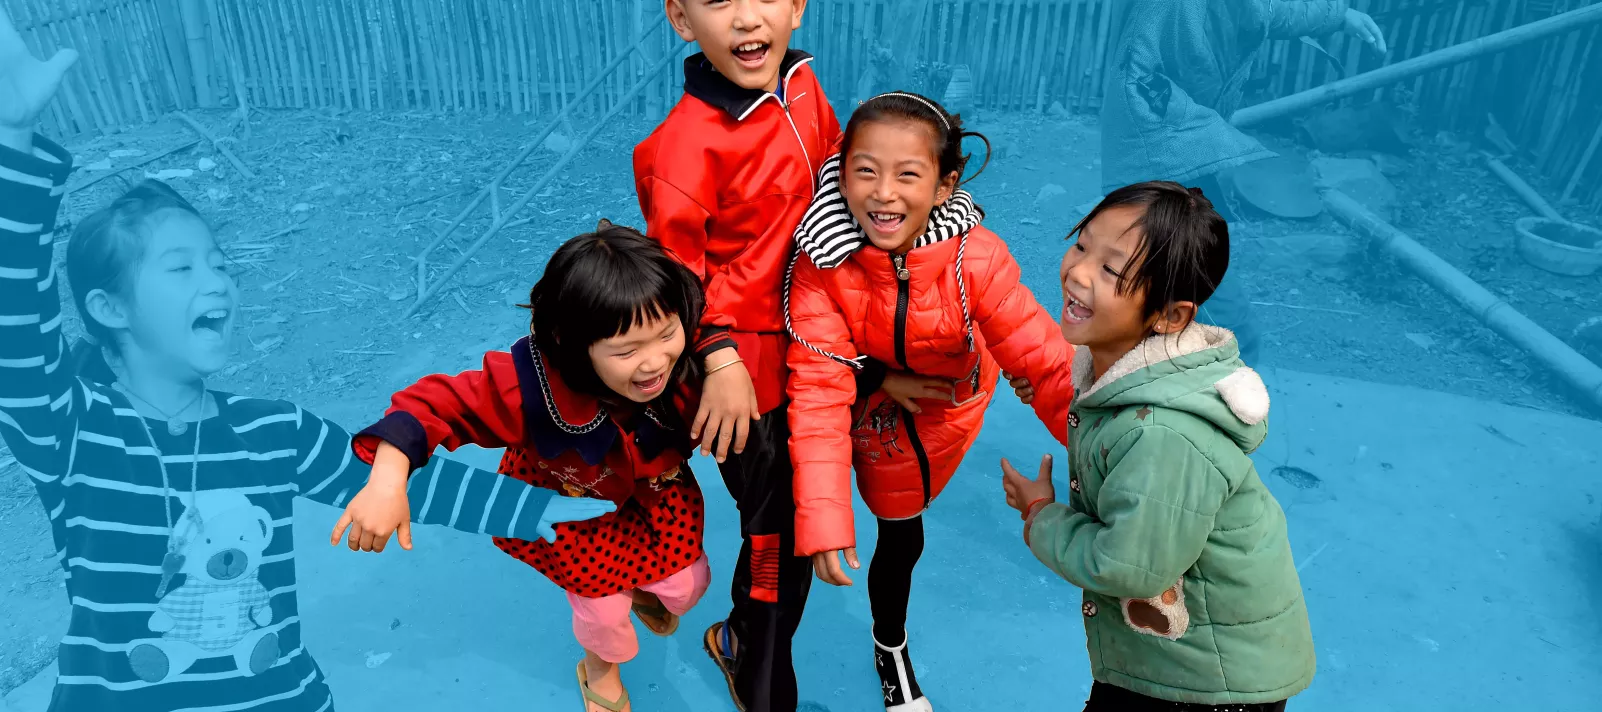 Girls and boys playing and laughing, rural China.